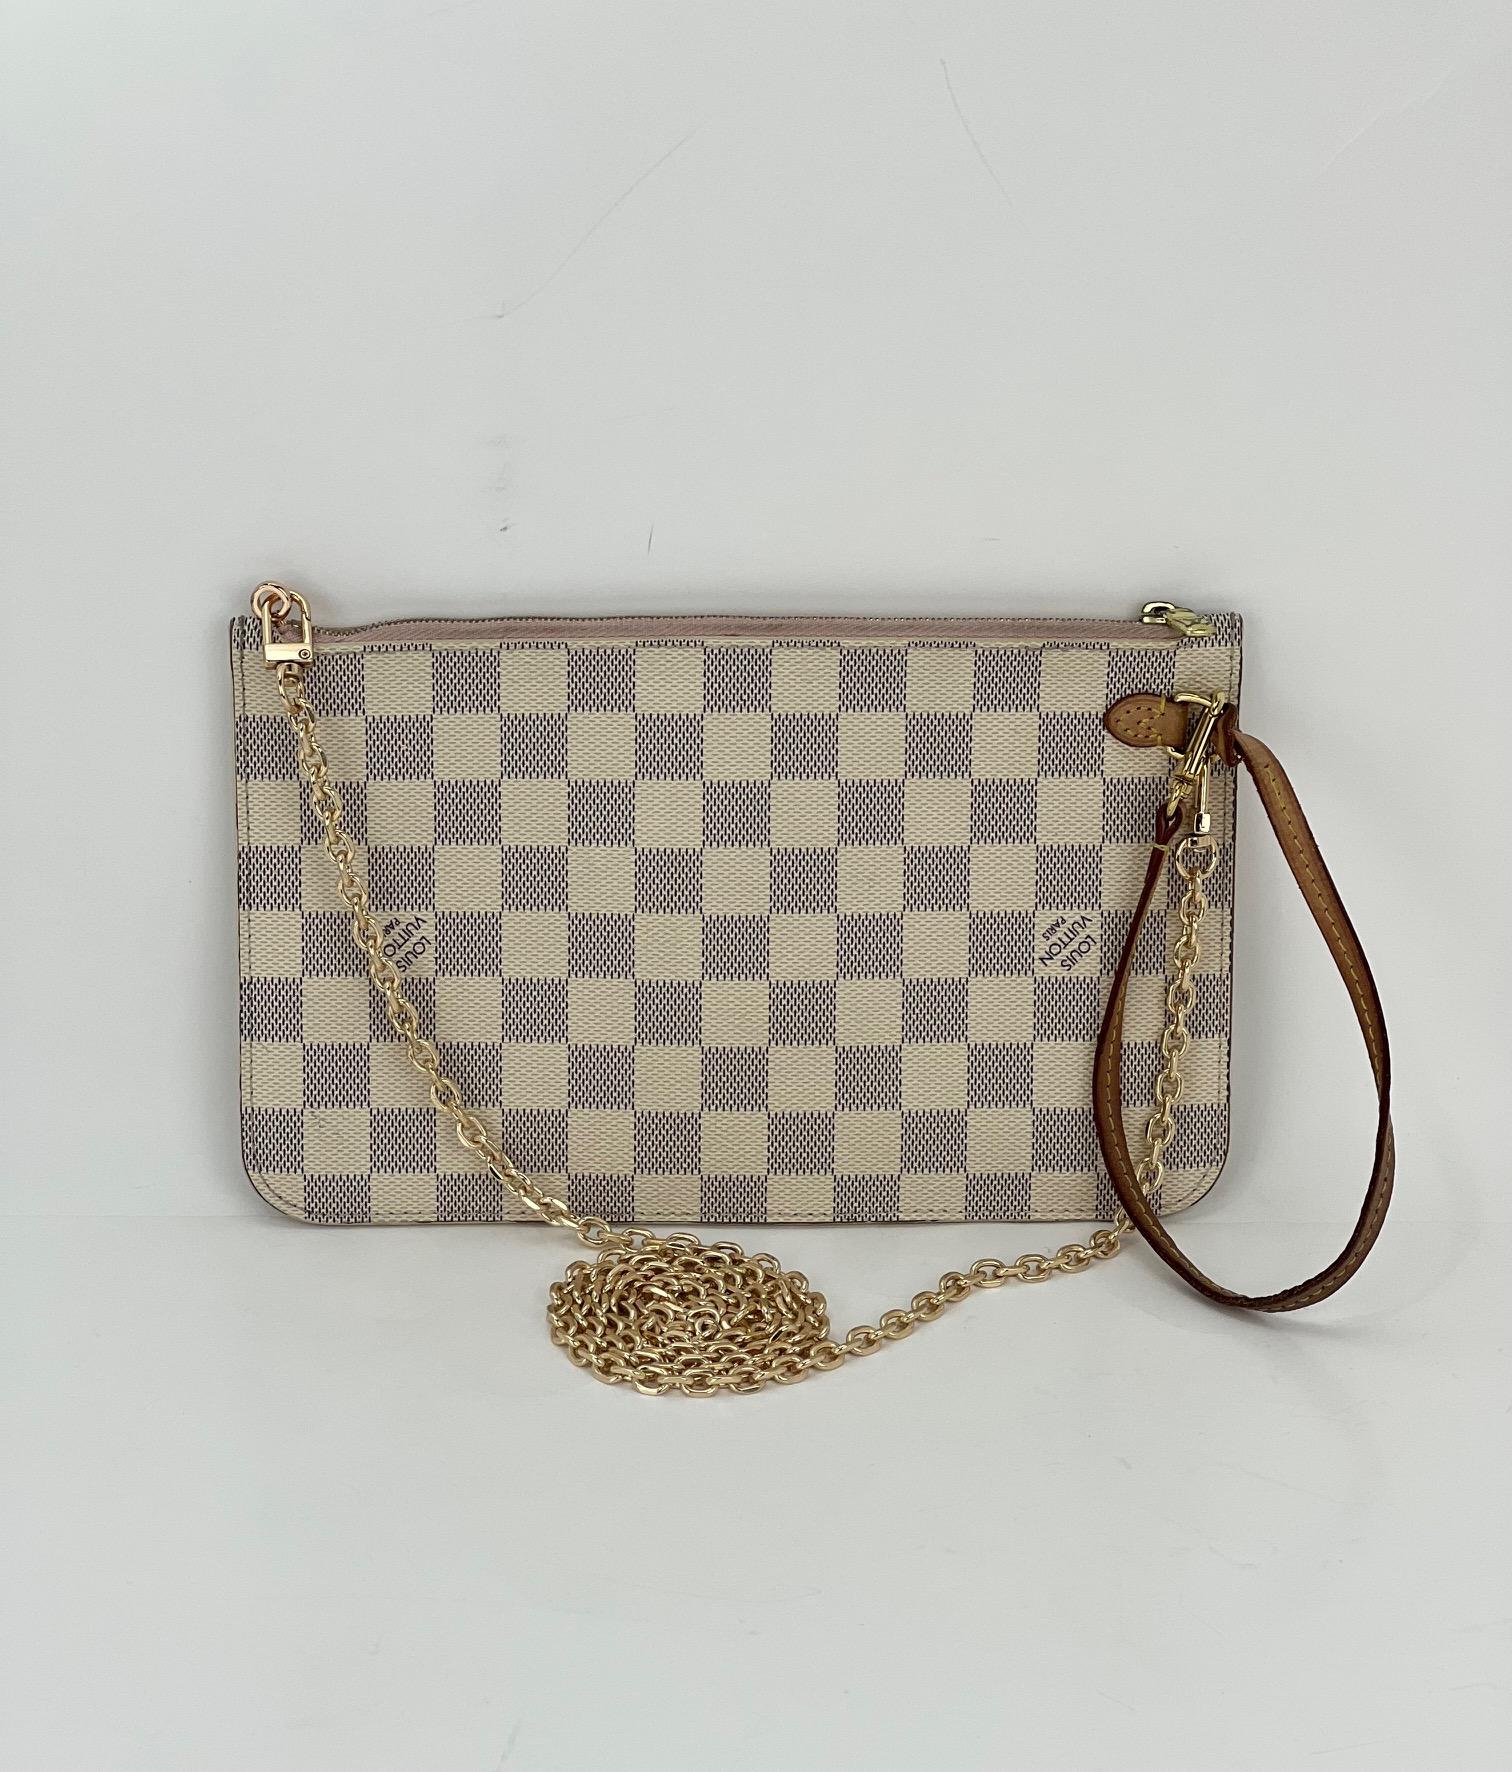 Pre-Owned 100% Authentic!
Louis Vuitton Pochette Damier Azur from a
Neverfull W/added Non LV Chain to use as
a Shoulder or Crossbody Bag
Please Note: added Non LV O-Ring at end of zipper pull
RATING: B-... good, shows some signs of wear
MATERIAL: